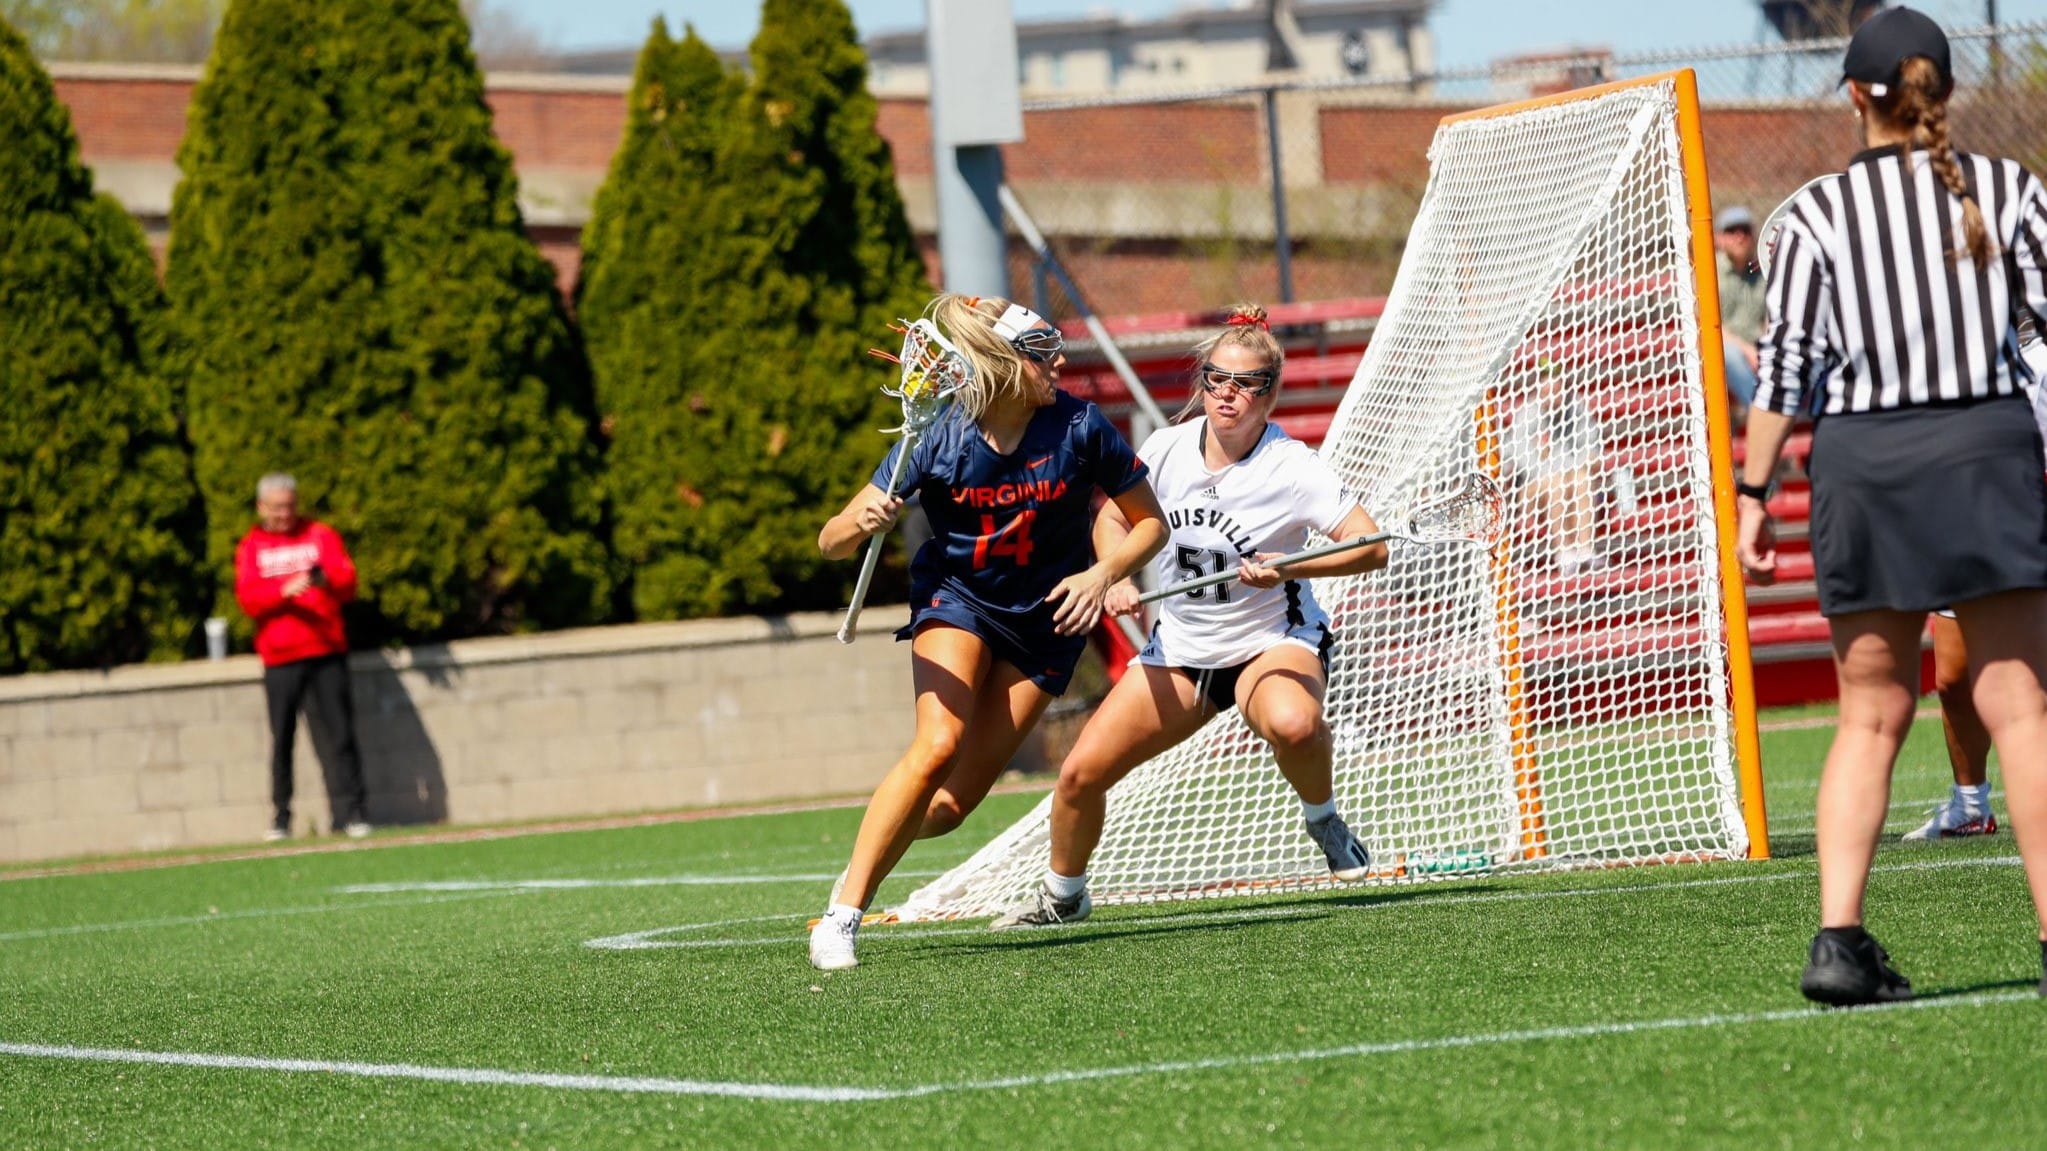 Virginia Women’s Lacrosse Dominates Louisville with 13-8 Win and 4th Quarter Surge